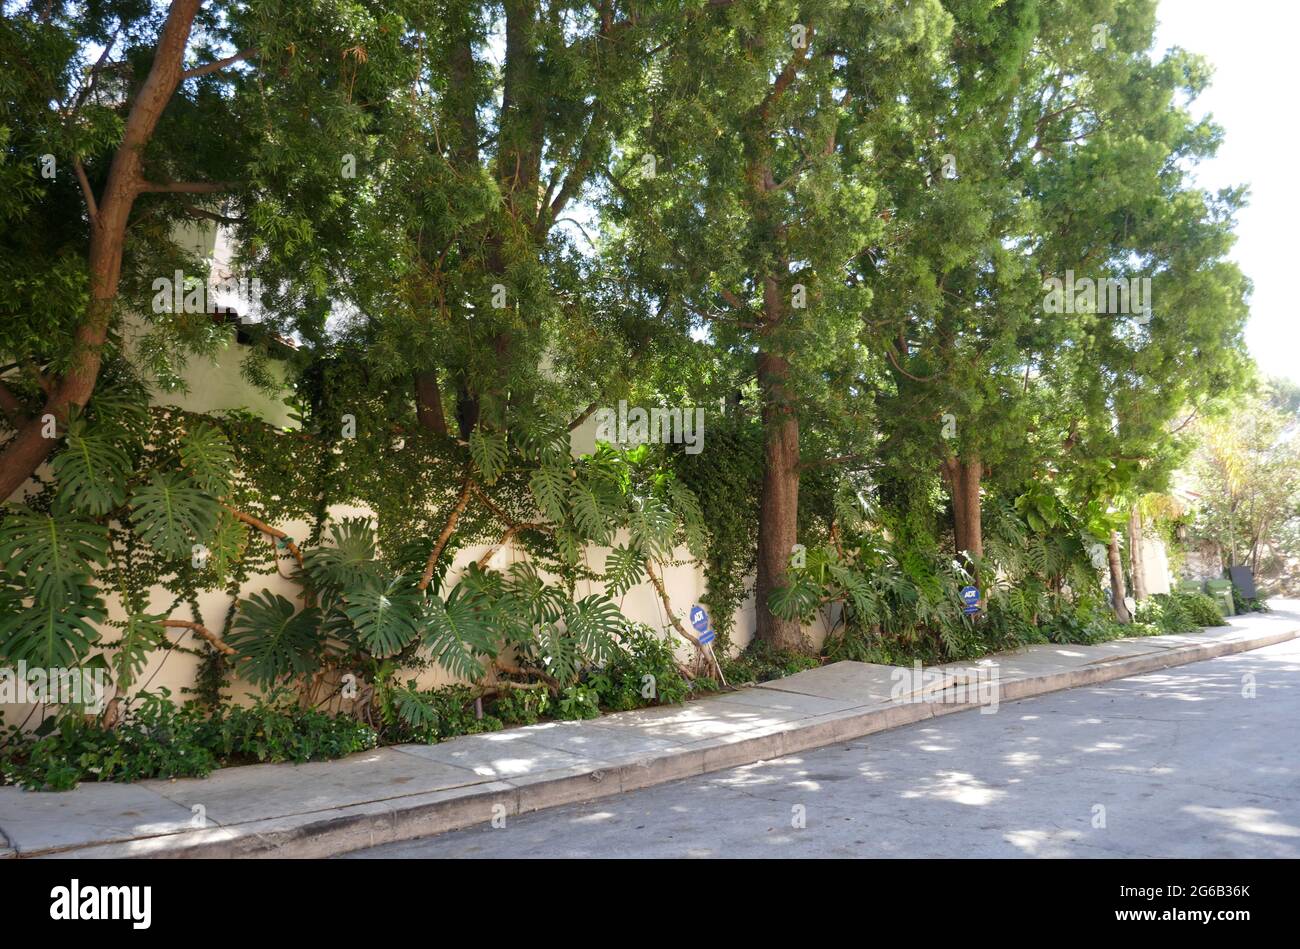 Los Angeles, California, USA 4th July 2021 A general view of atmosphere of actress/director Ida Lupino's Former home/house in Hollywood Hills on July 4, 2021 in Los Angeles, California, USA. Photo by Barry King/Alamy Stock Photo Stock Photo